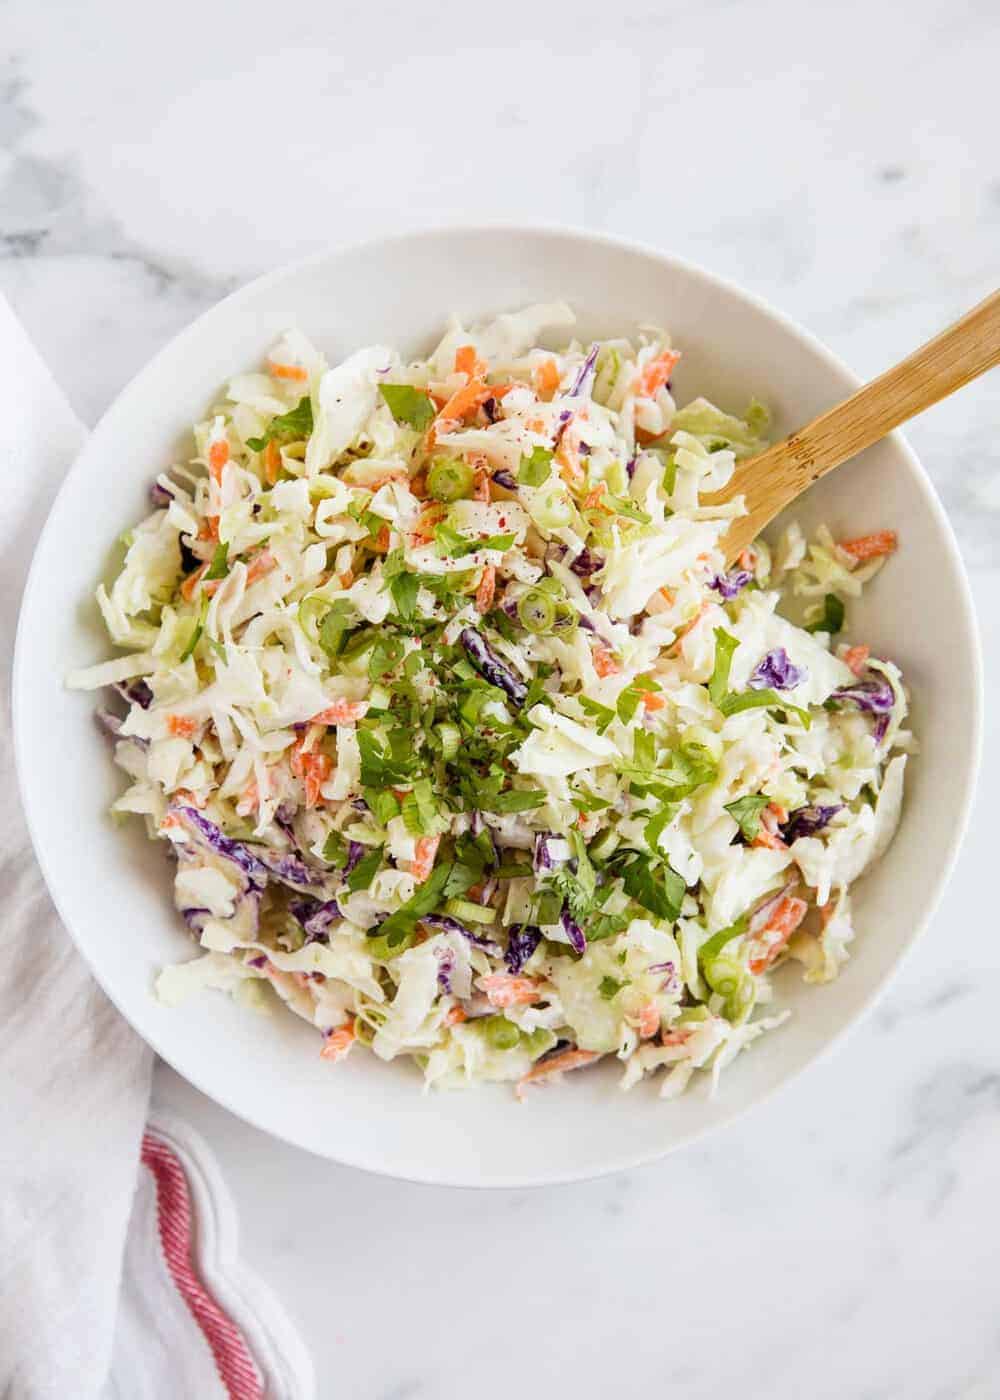 Homemade coleslaw in a white bowl with a wooden spoon.